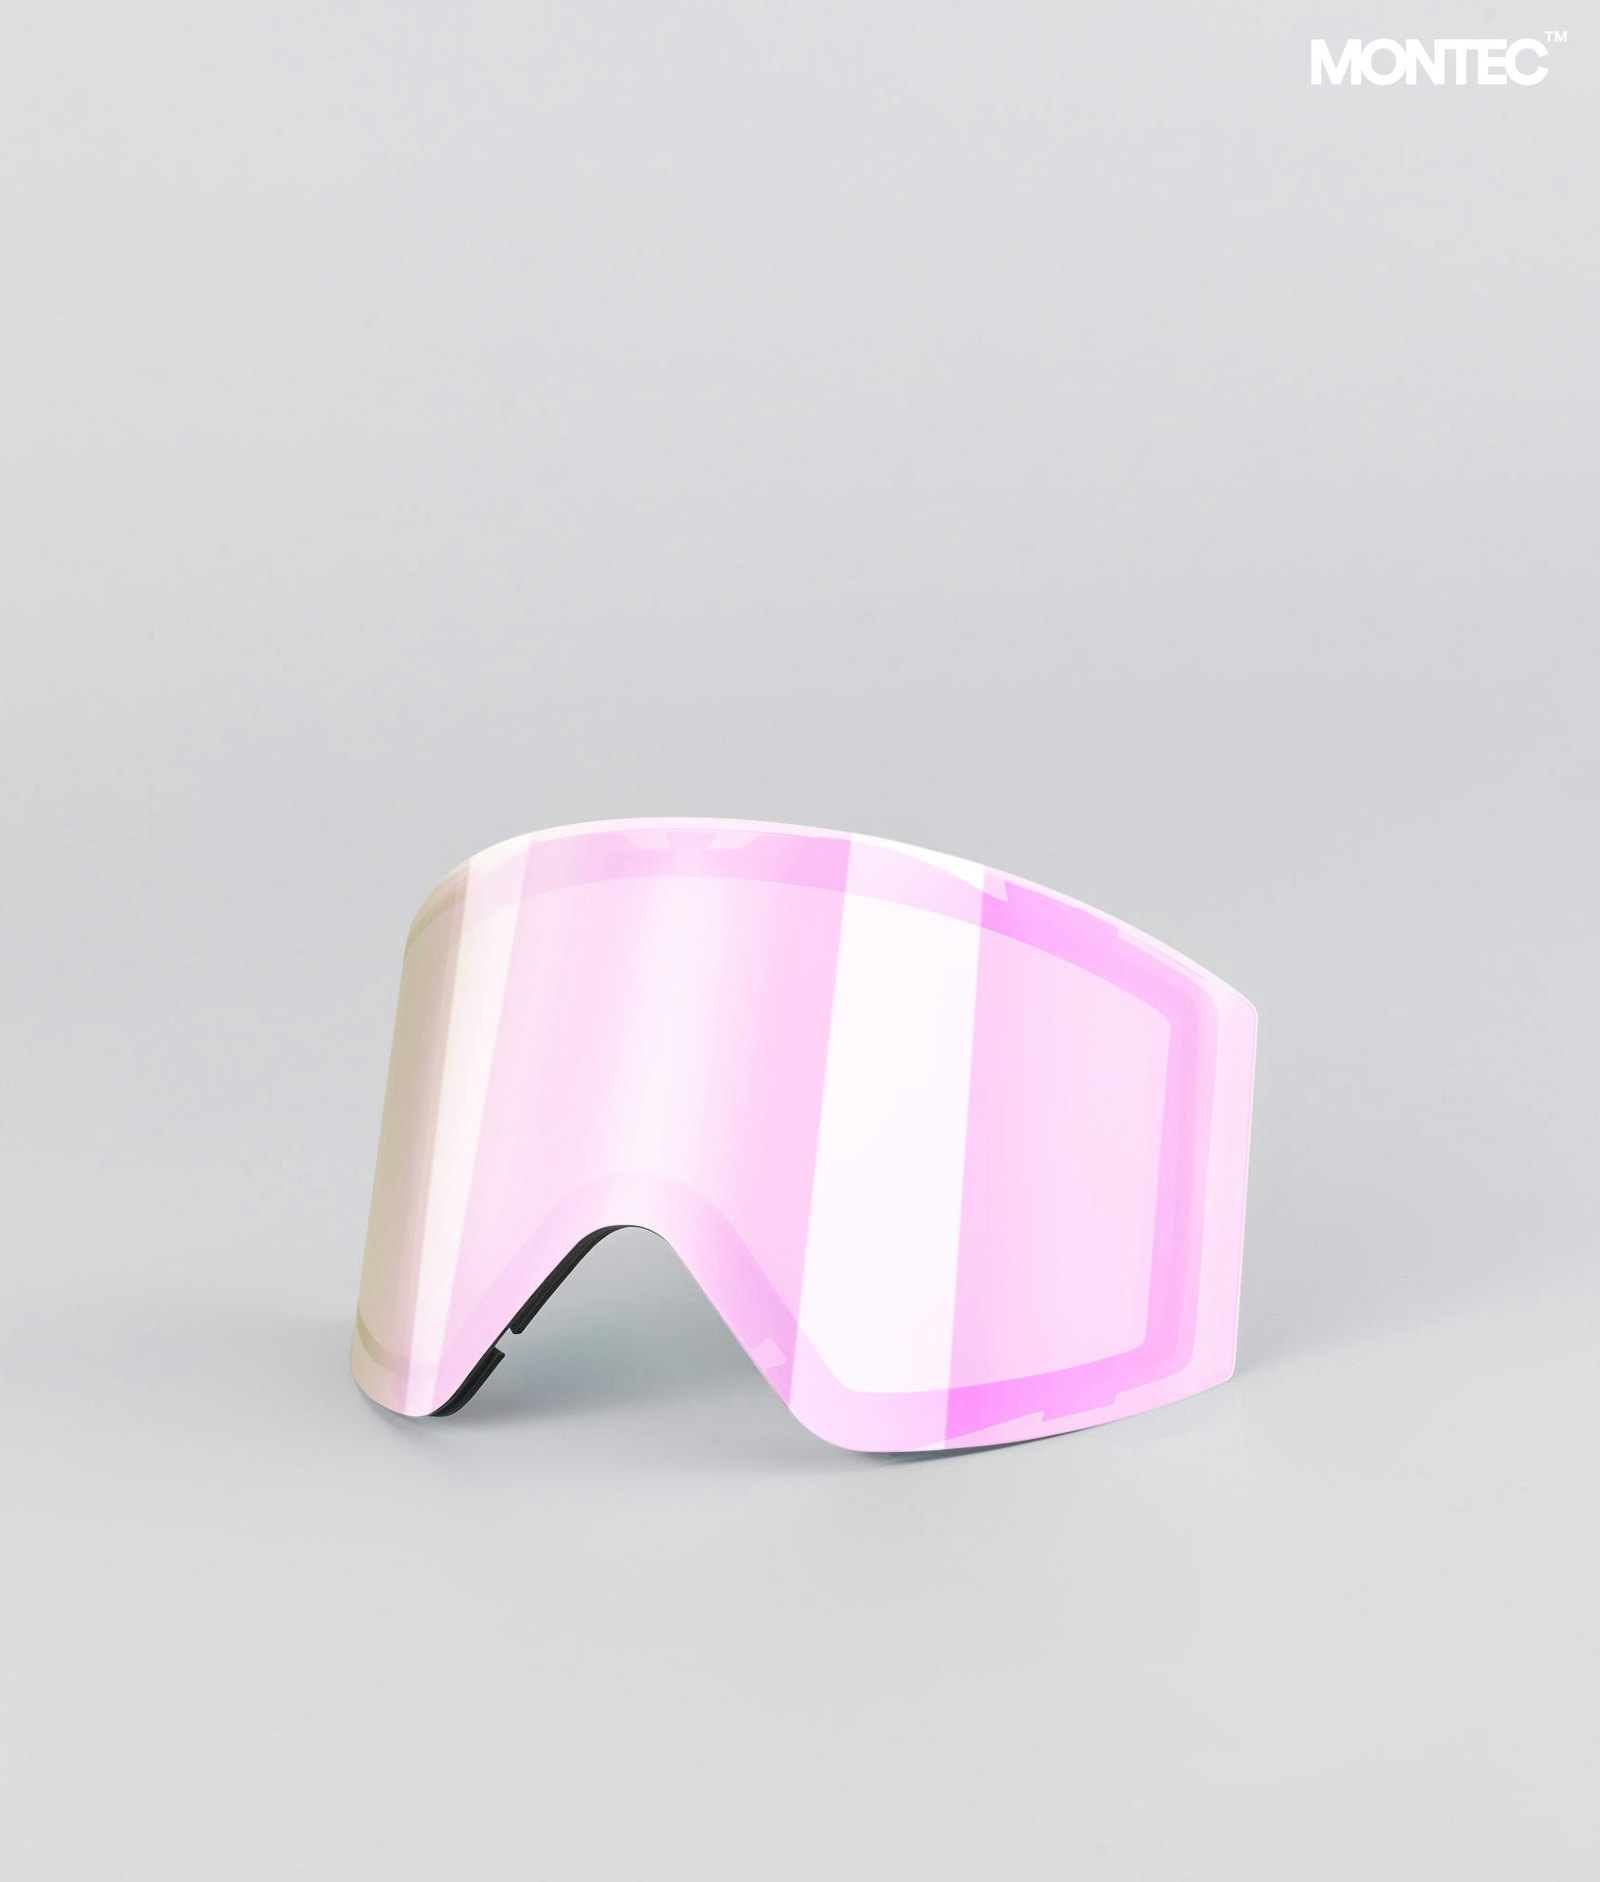 Montec Scope 2020 Goggle Lens Large Extralins Snow Pink Sapphire